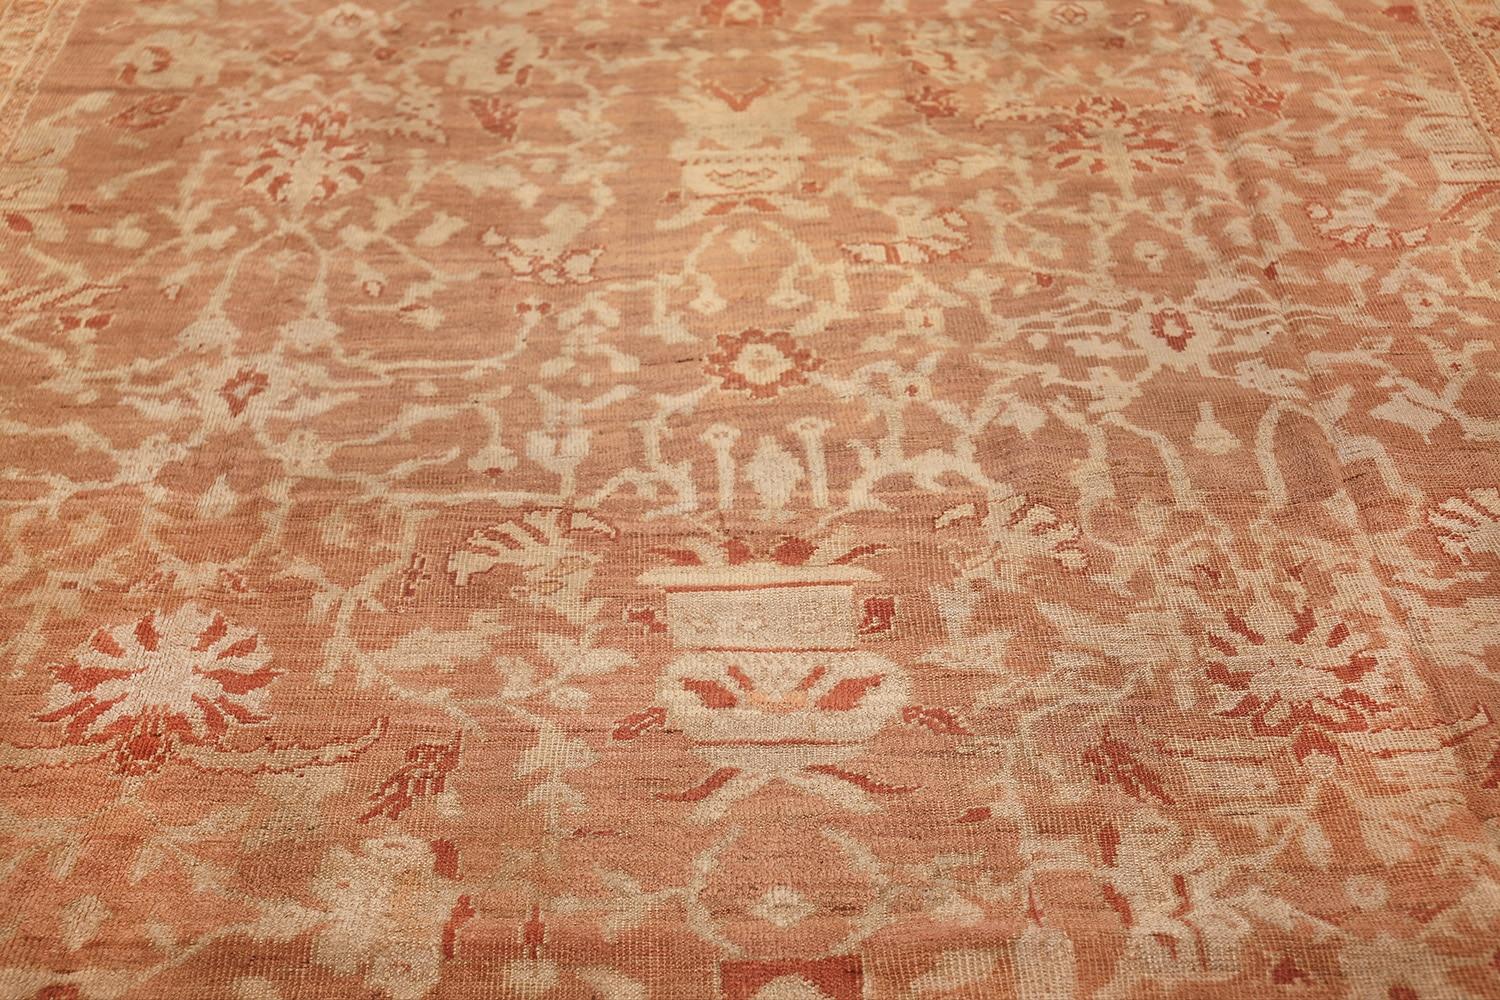 19th Century Nazmiyal Decorative Antique Persian Ziegler Sultanabad Rug. Size: 11 ft x 15 ft For Sale